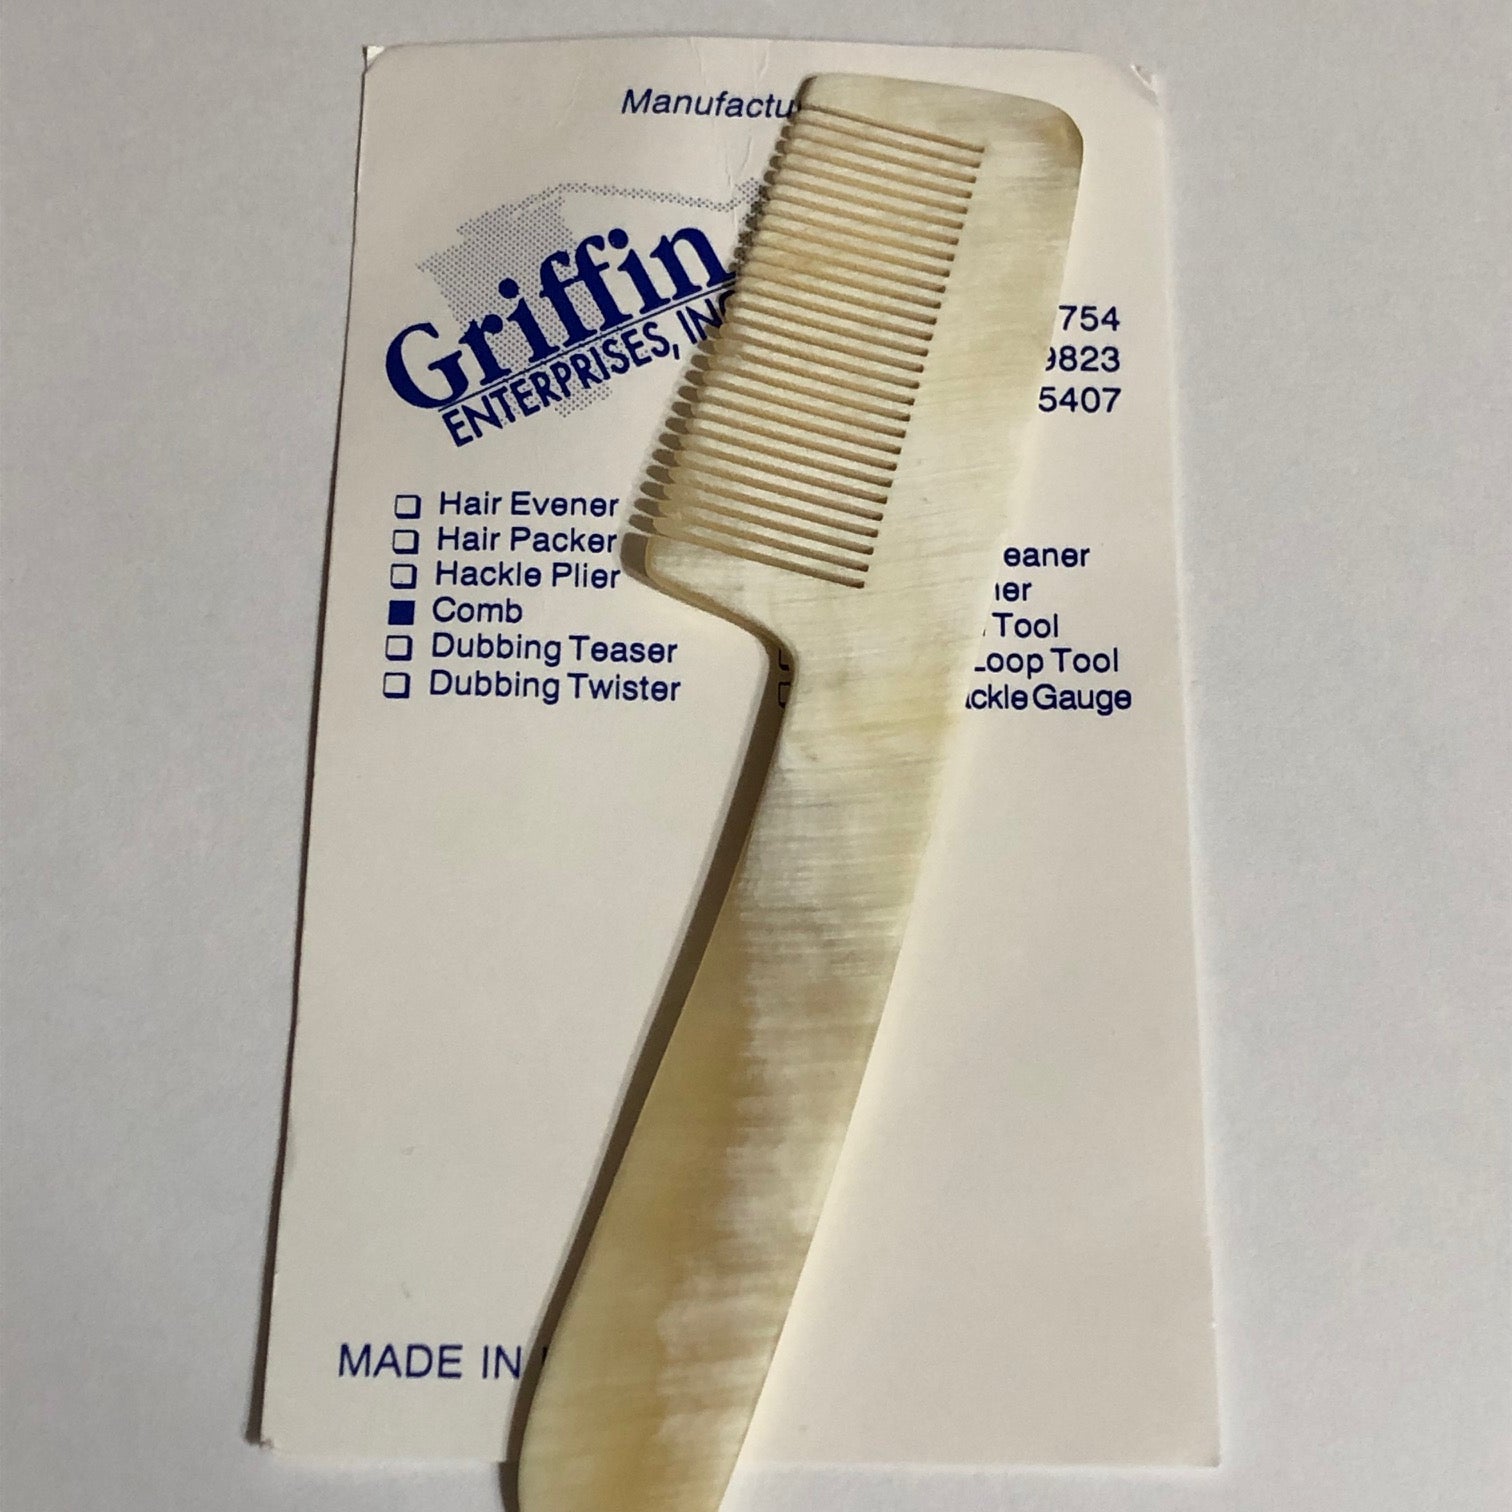 Griffin Comb